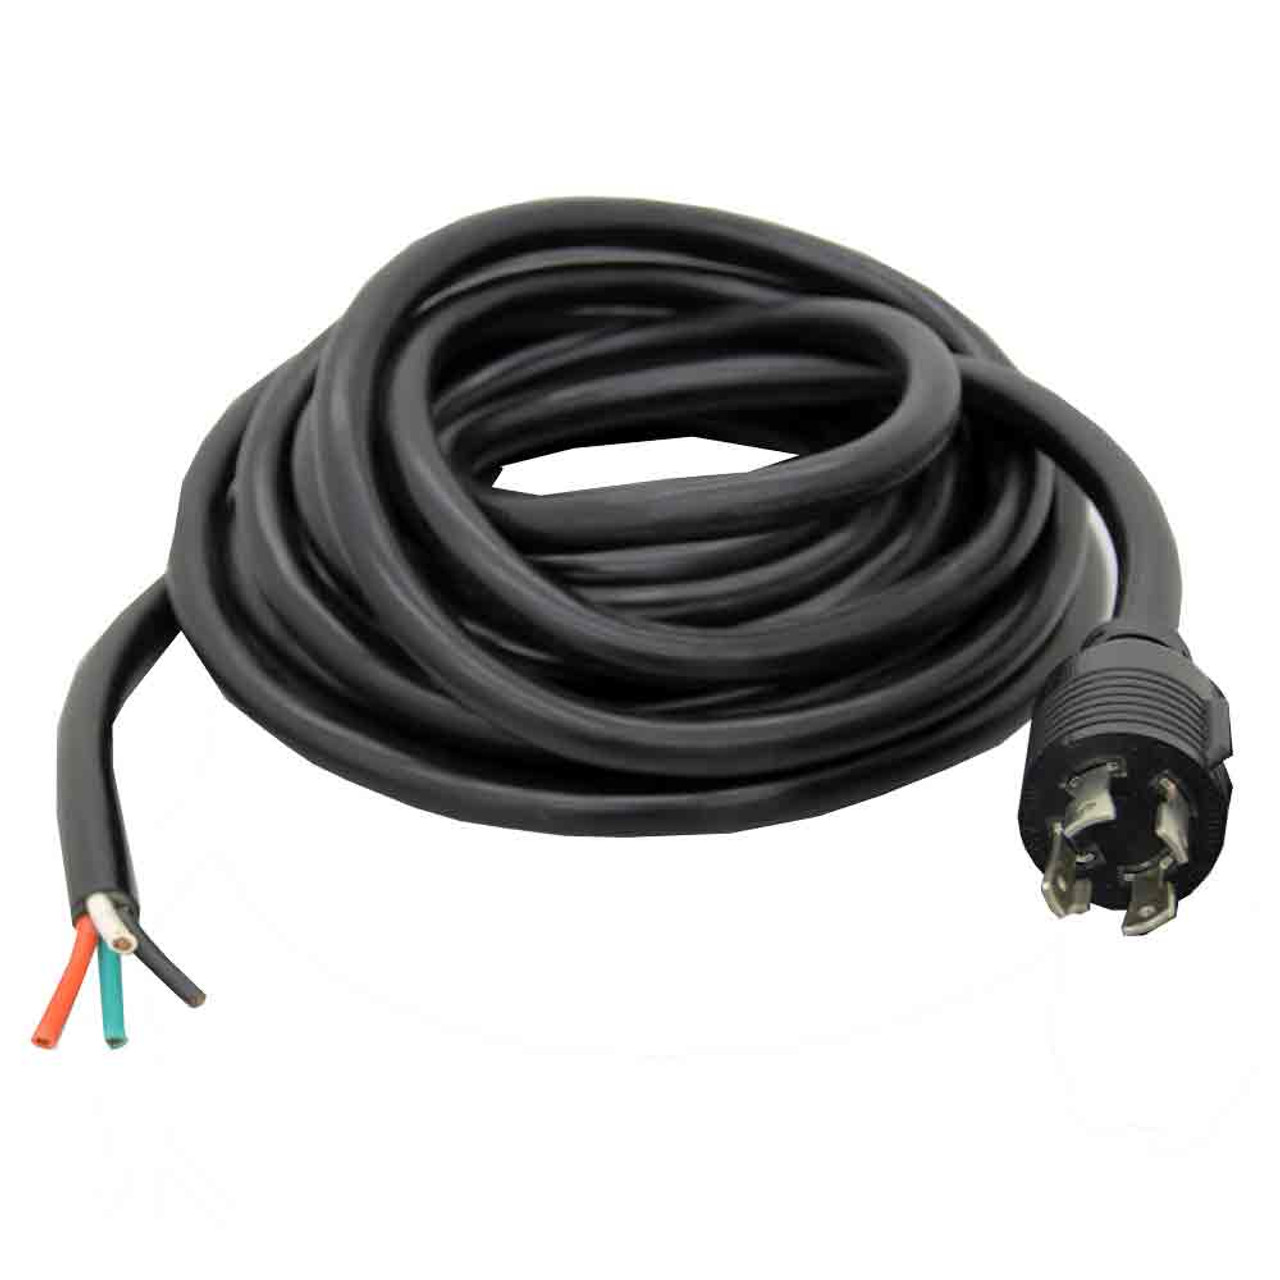 AIMS 30 AMP Generator Output Cable 4 Wire 10 AWG 120/240V 30FT